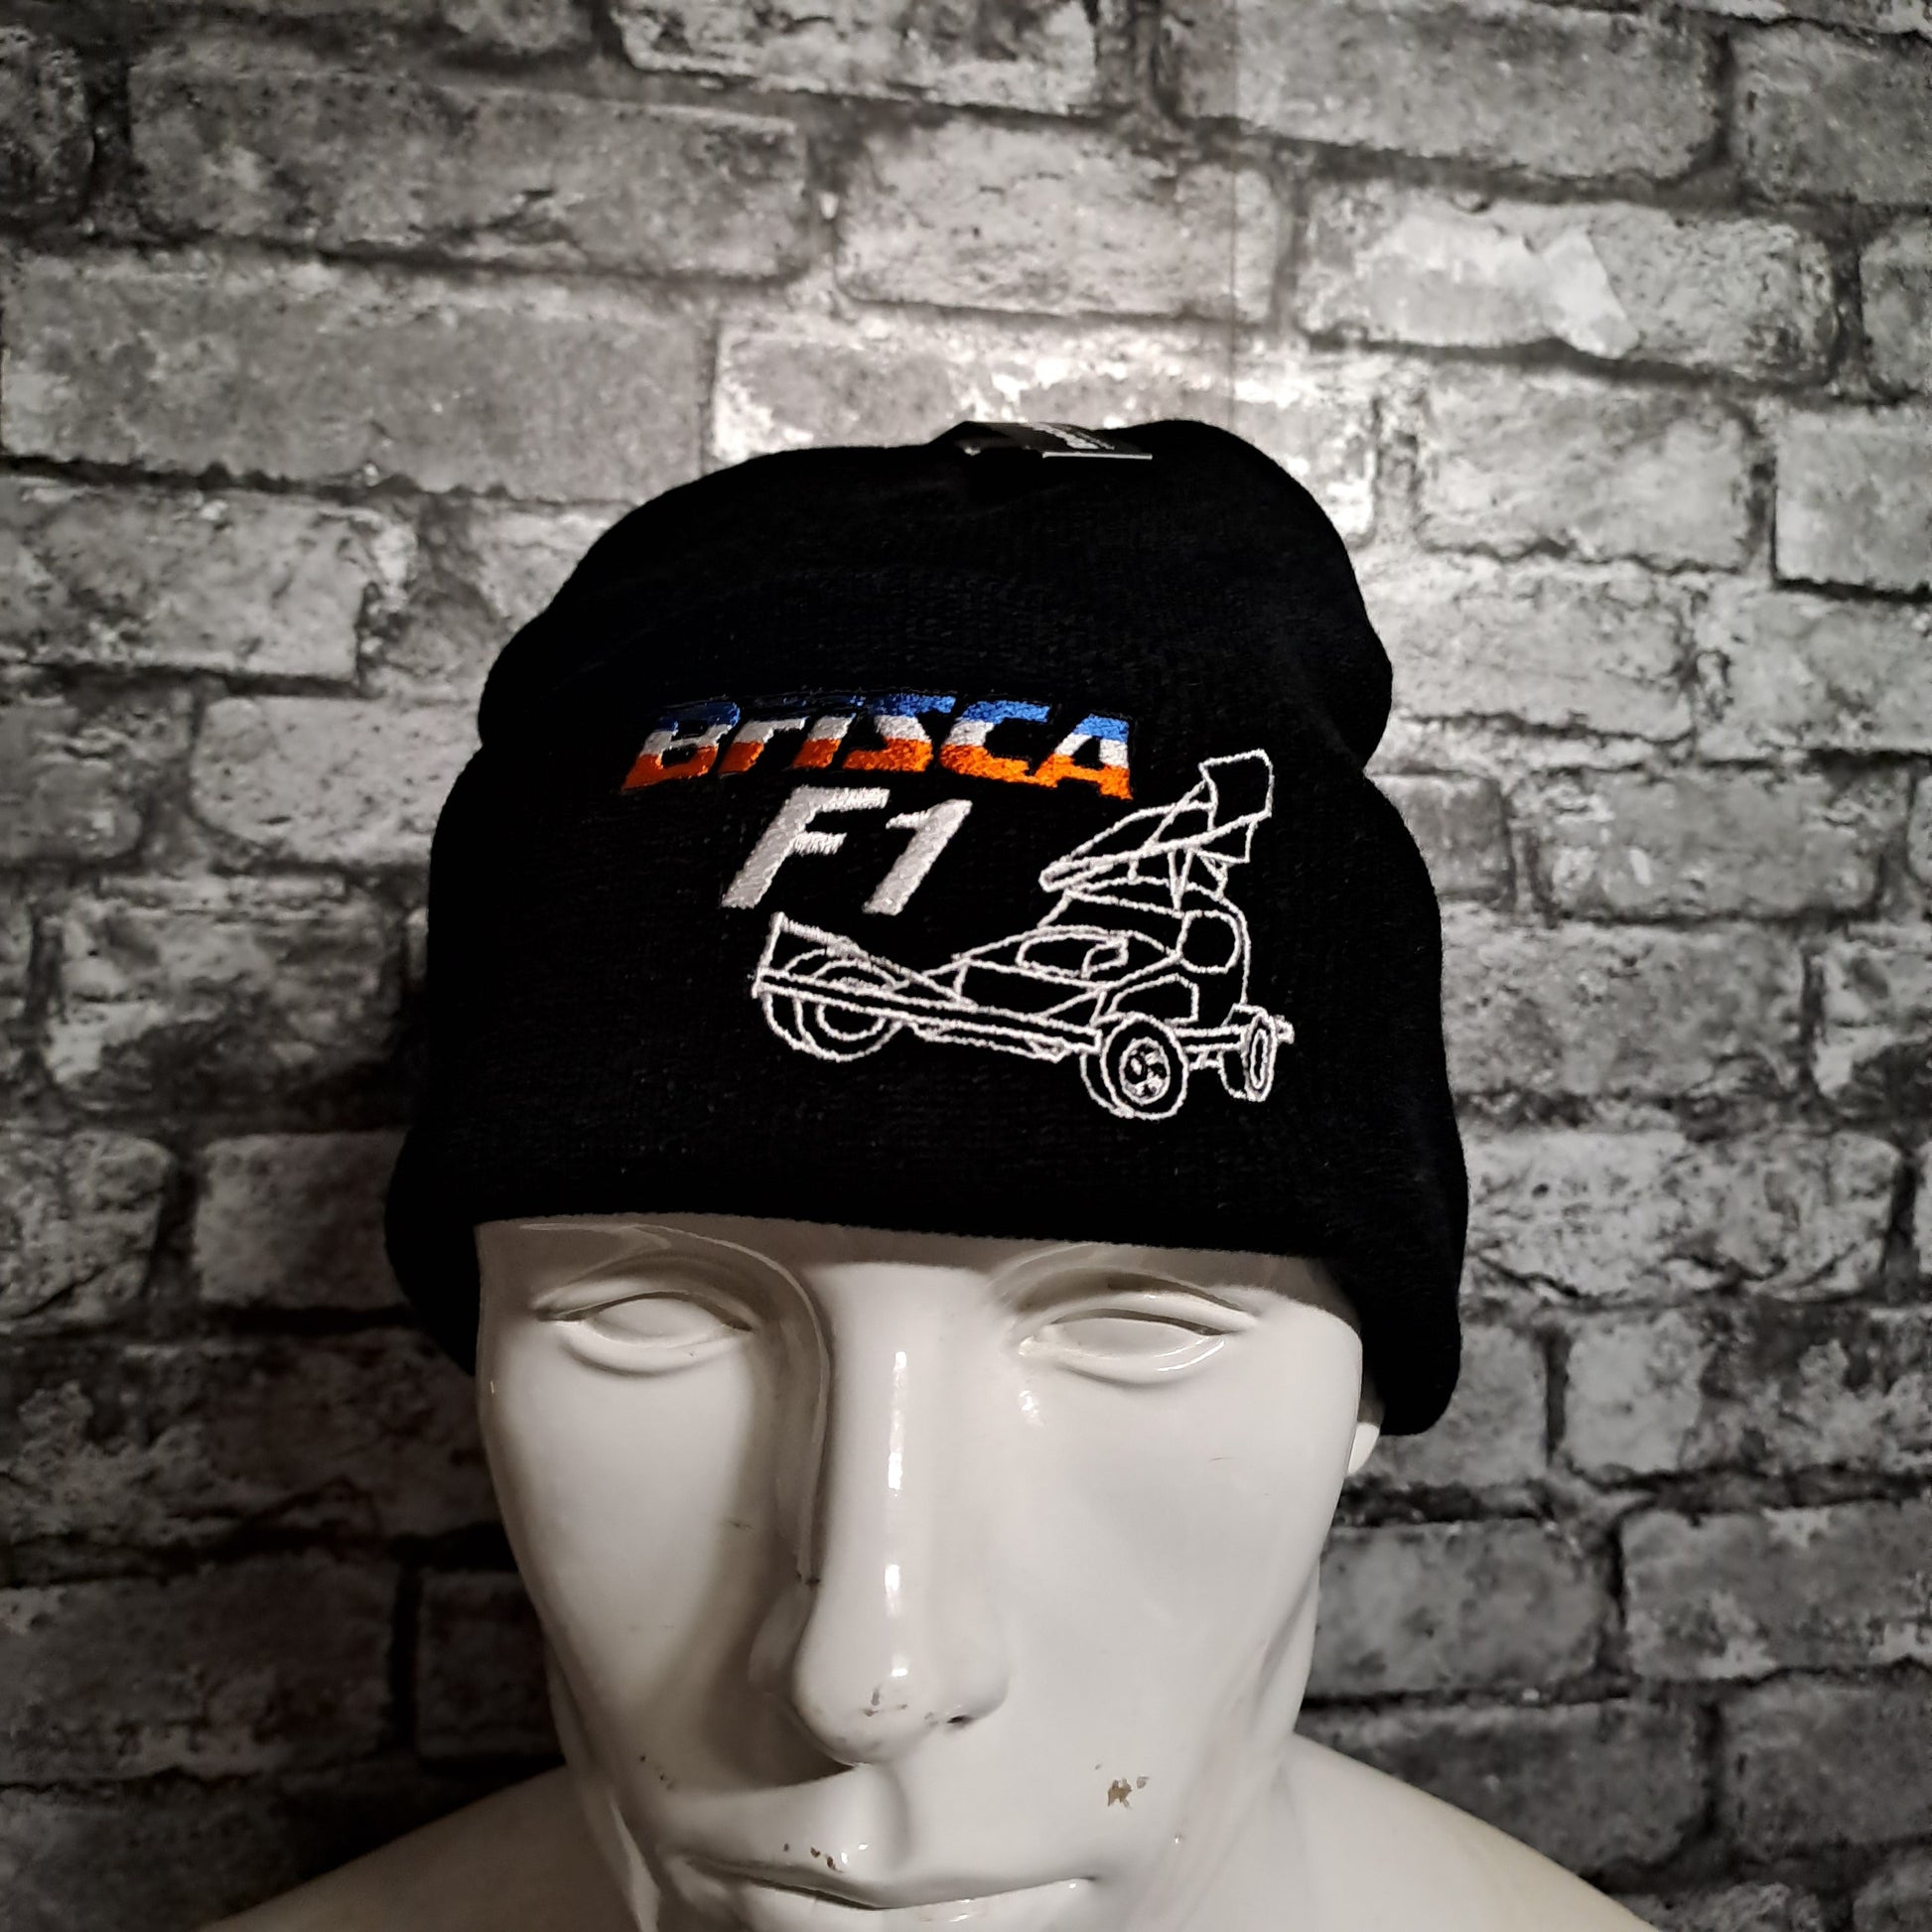 Brisca F1 Beanie Hats in a Variety of Colours - Hats - Stock Car & Banger Toy Tracks